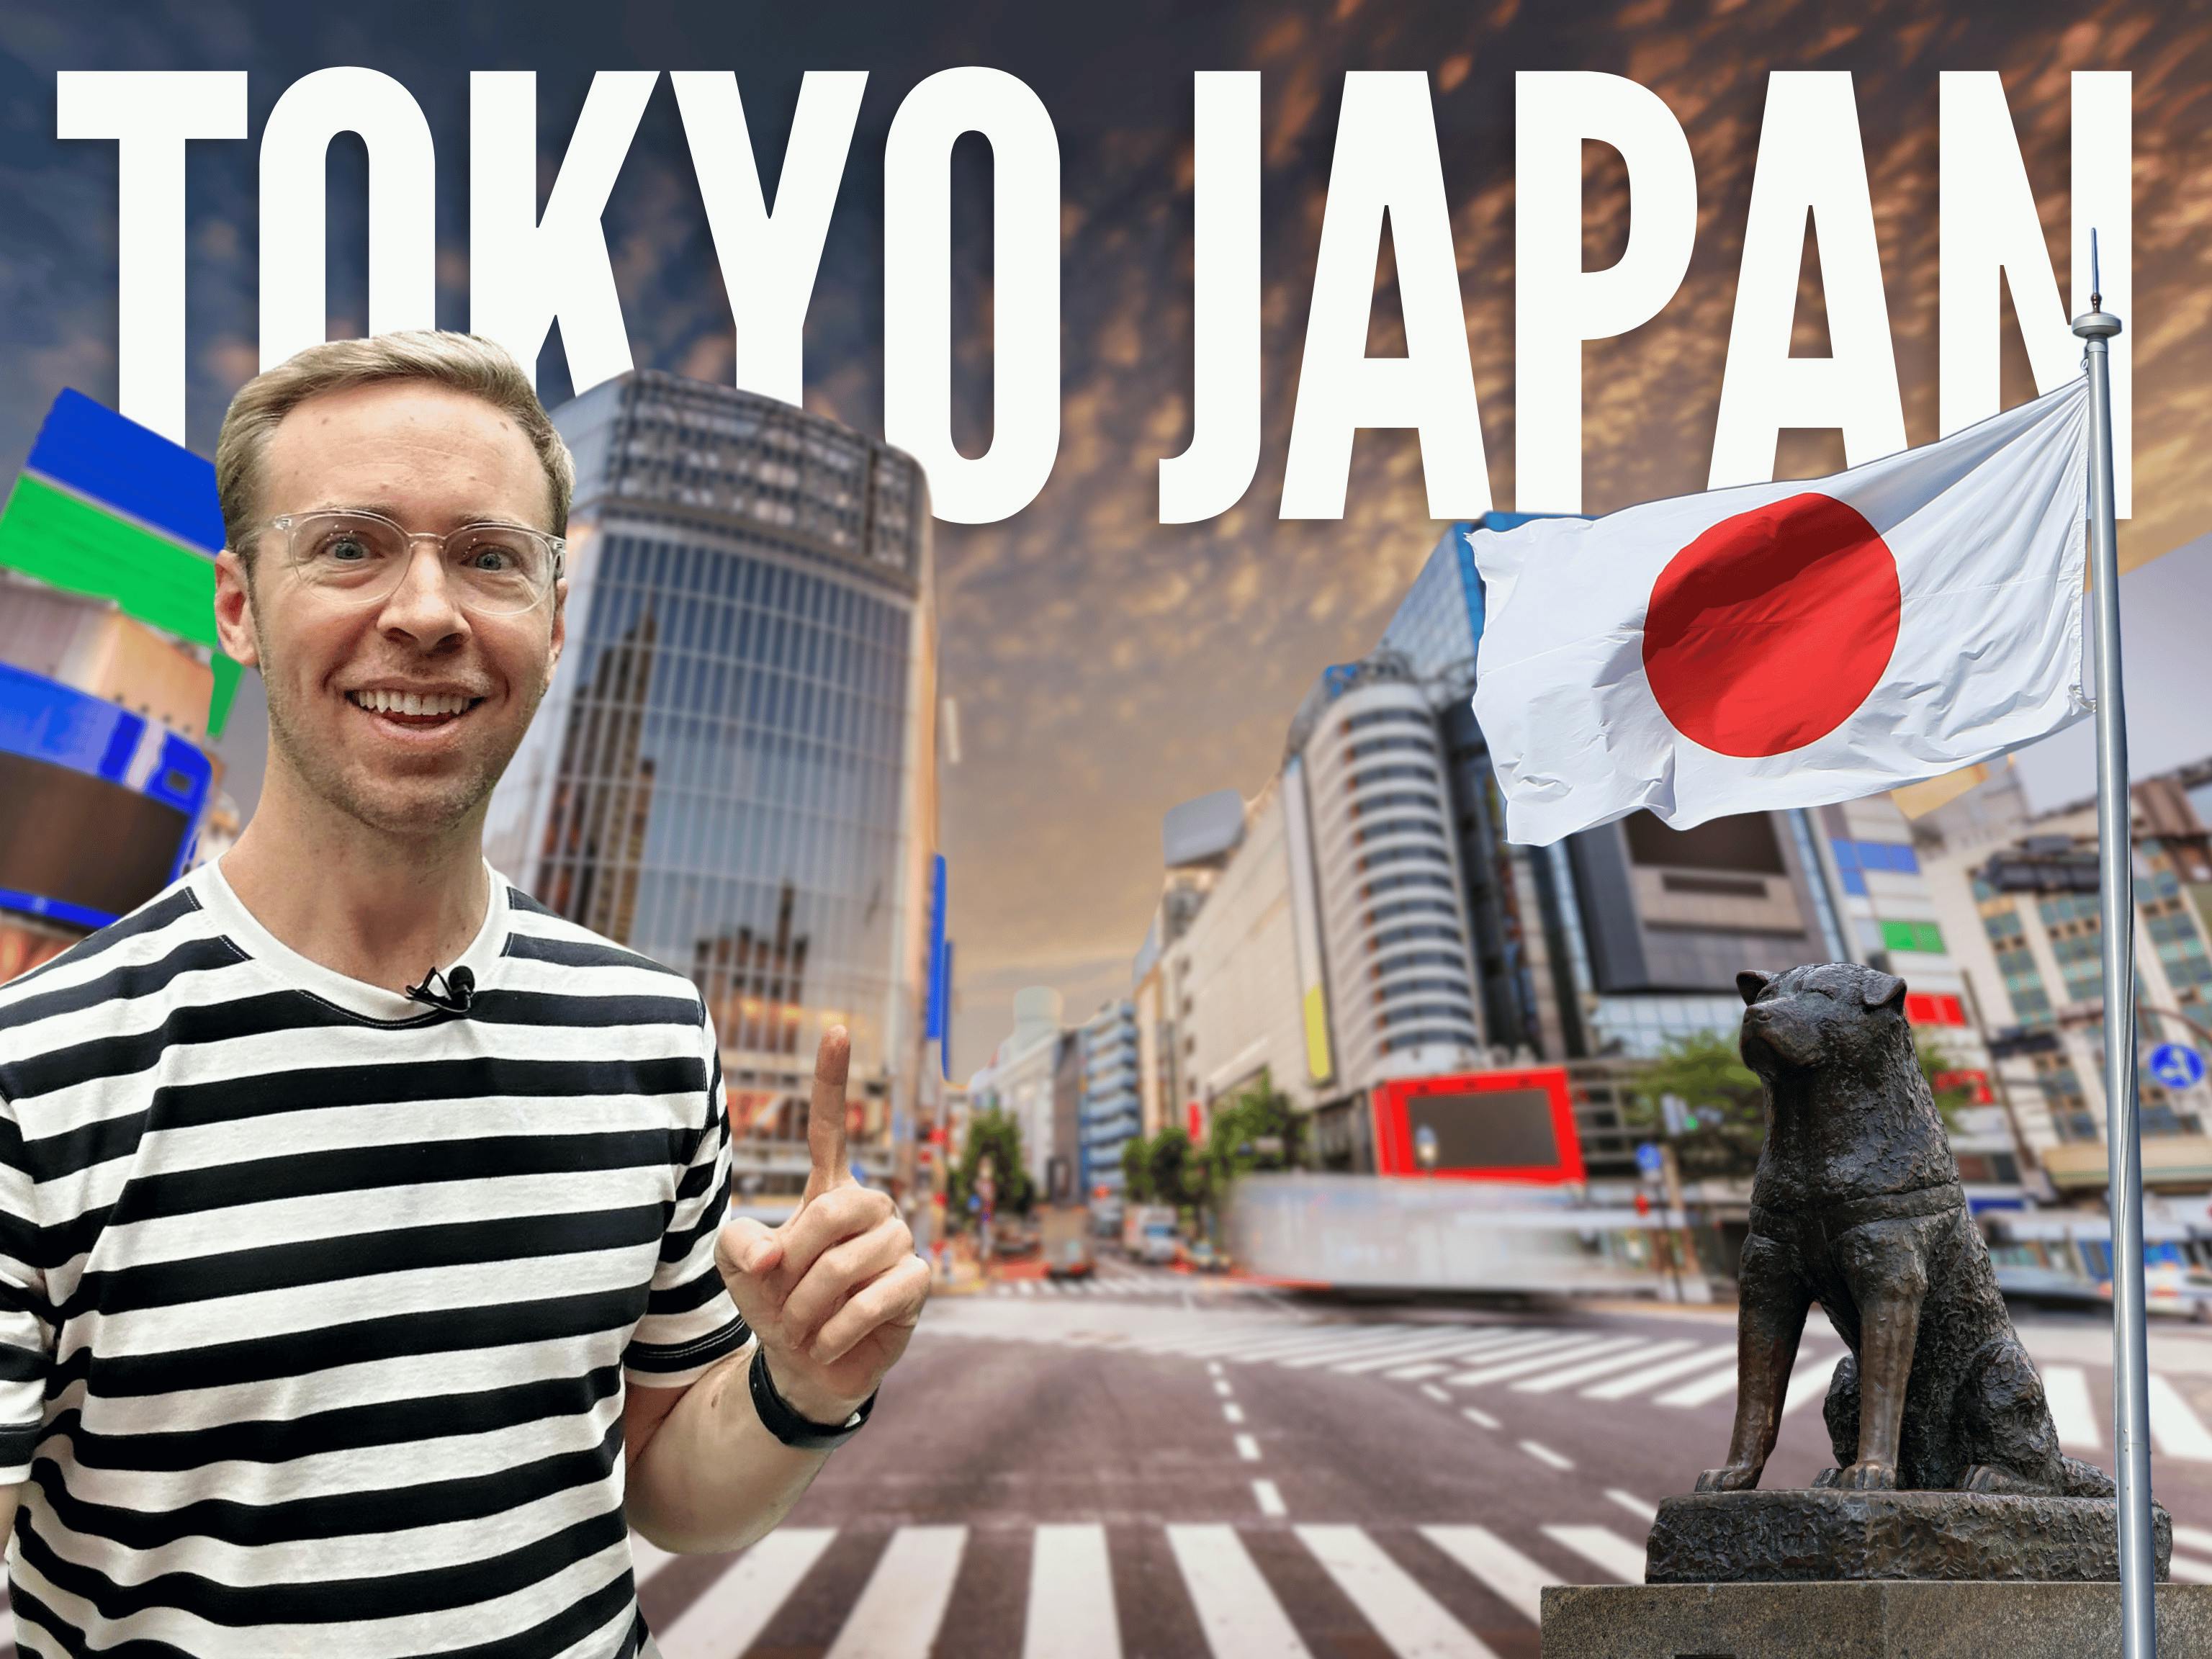 Header text: Tokyo Japan with a background photo of Shibuya Crossing and a headshot of Nick Gray